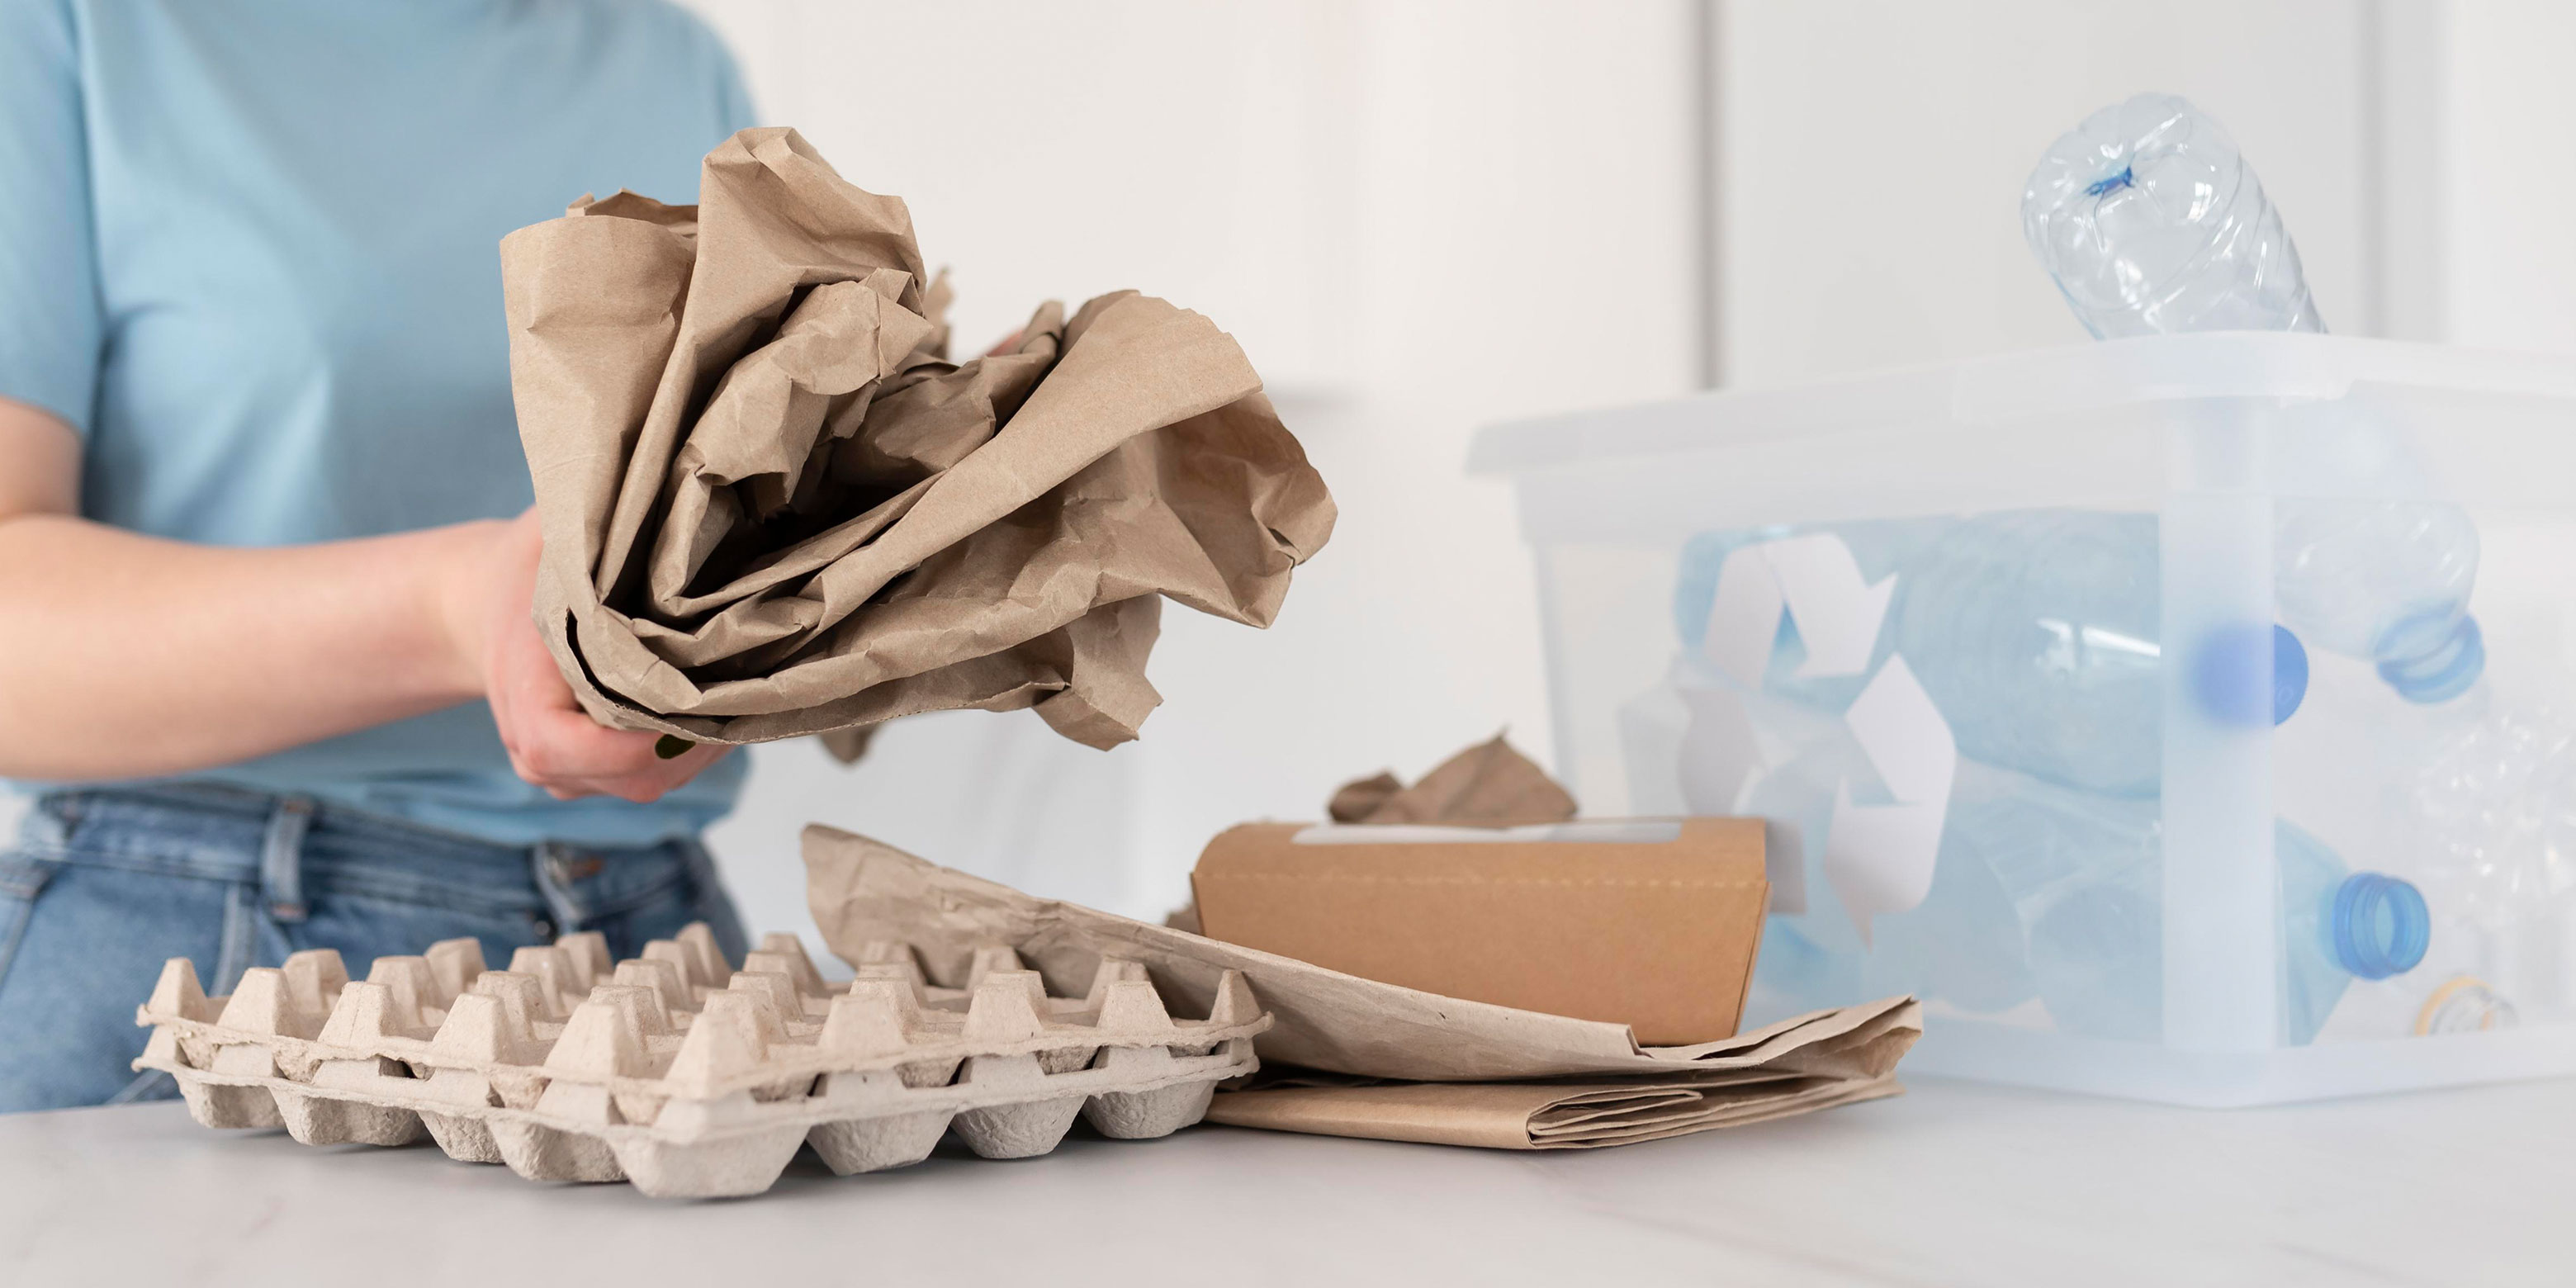 8 Sustainable Packaging Solutions to Solve the Waste Dilemma